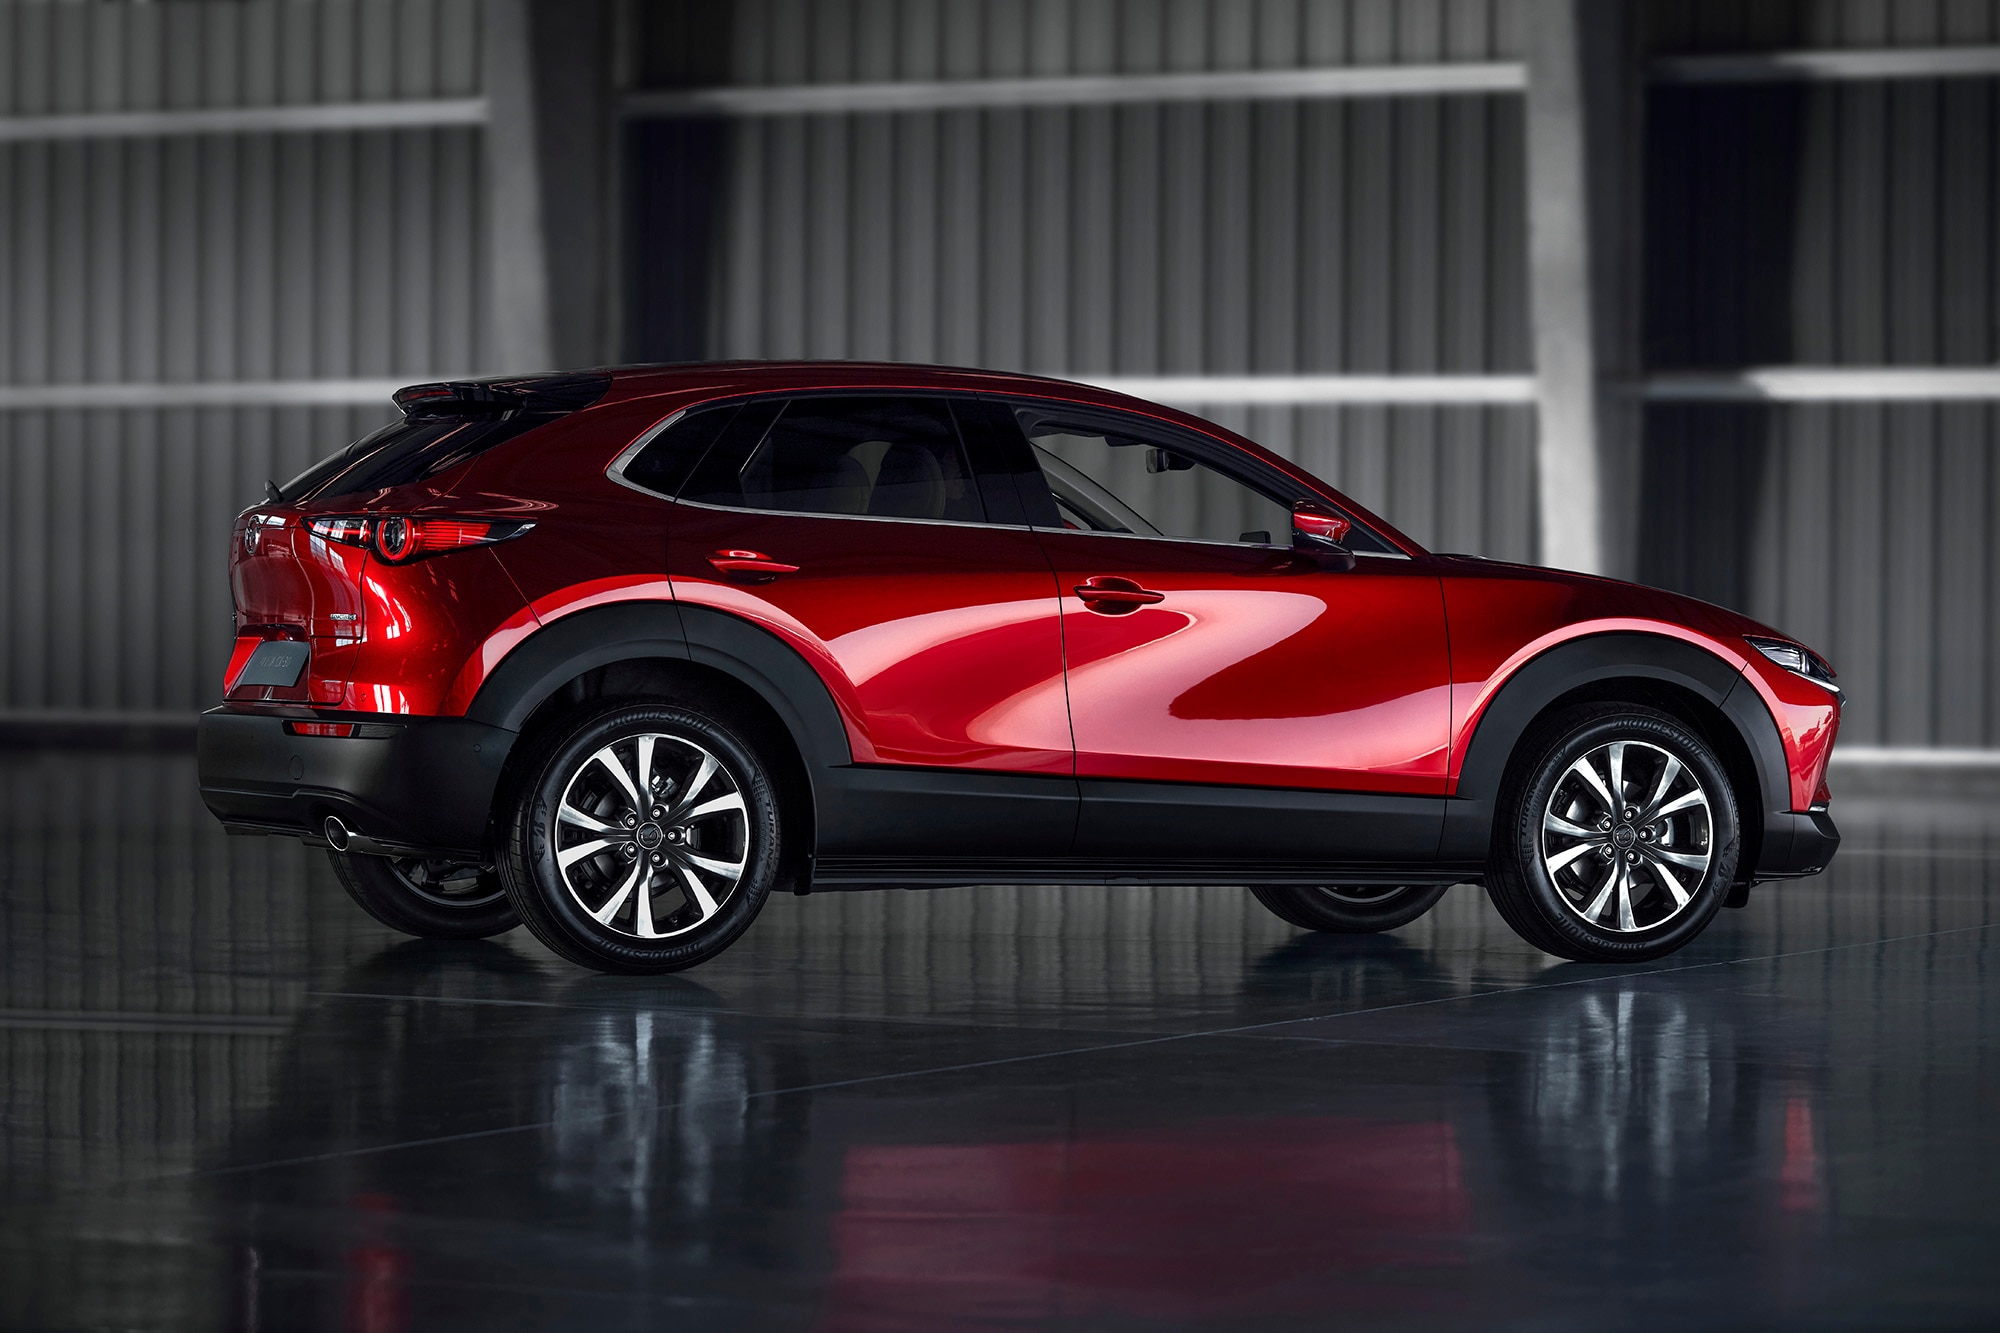 2023 Mazda CX-30 in red, side-rear view